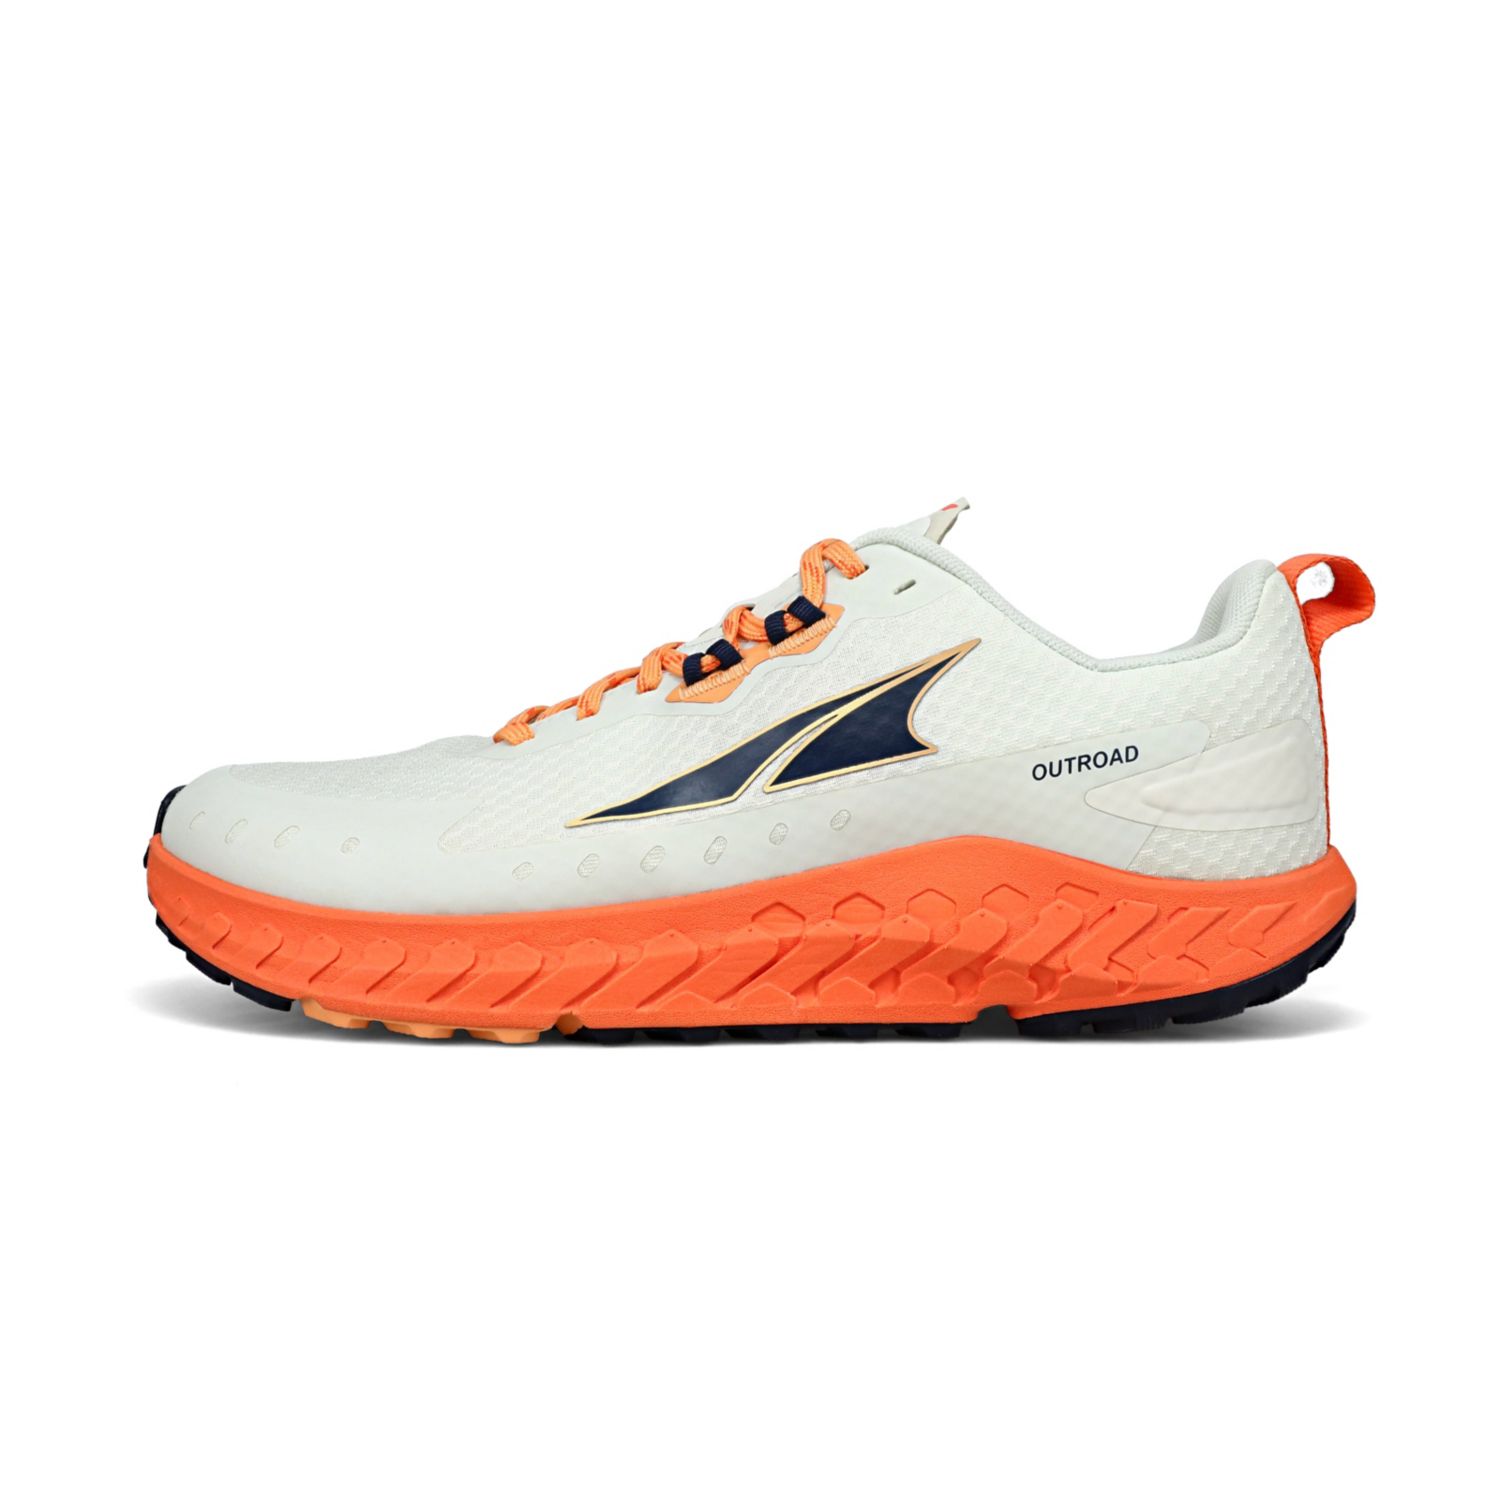 White / Orange Men's Altra Outroad Trail Running Shoes | Israel-16023979